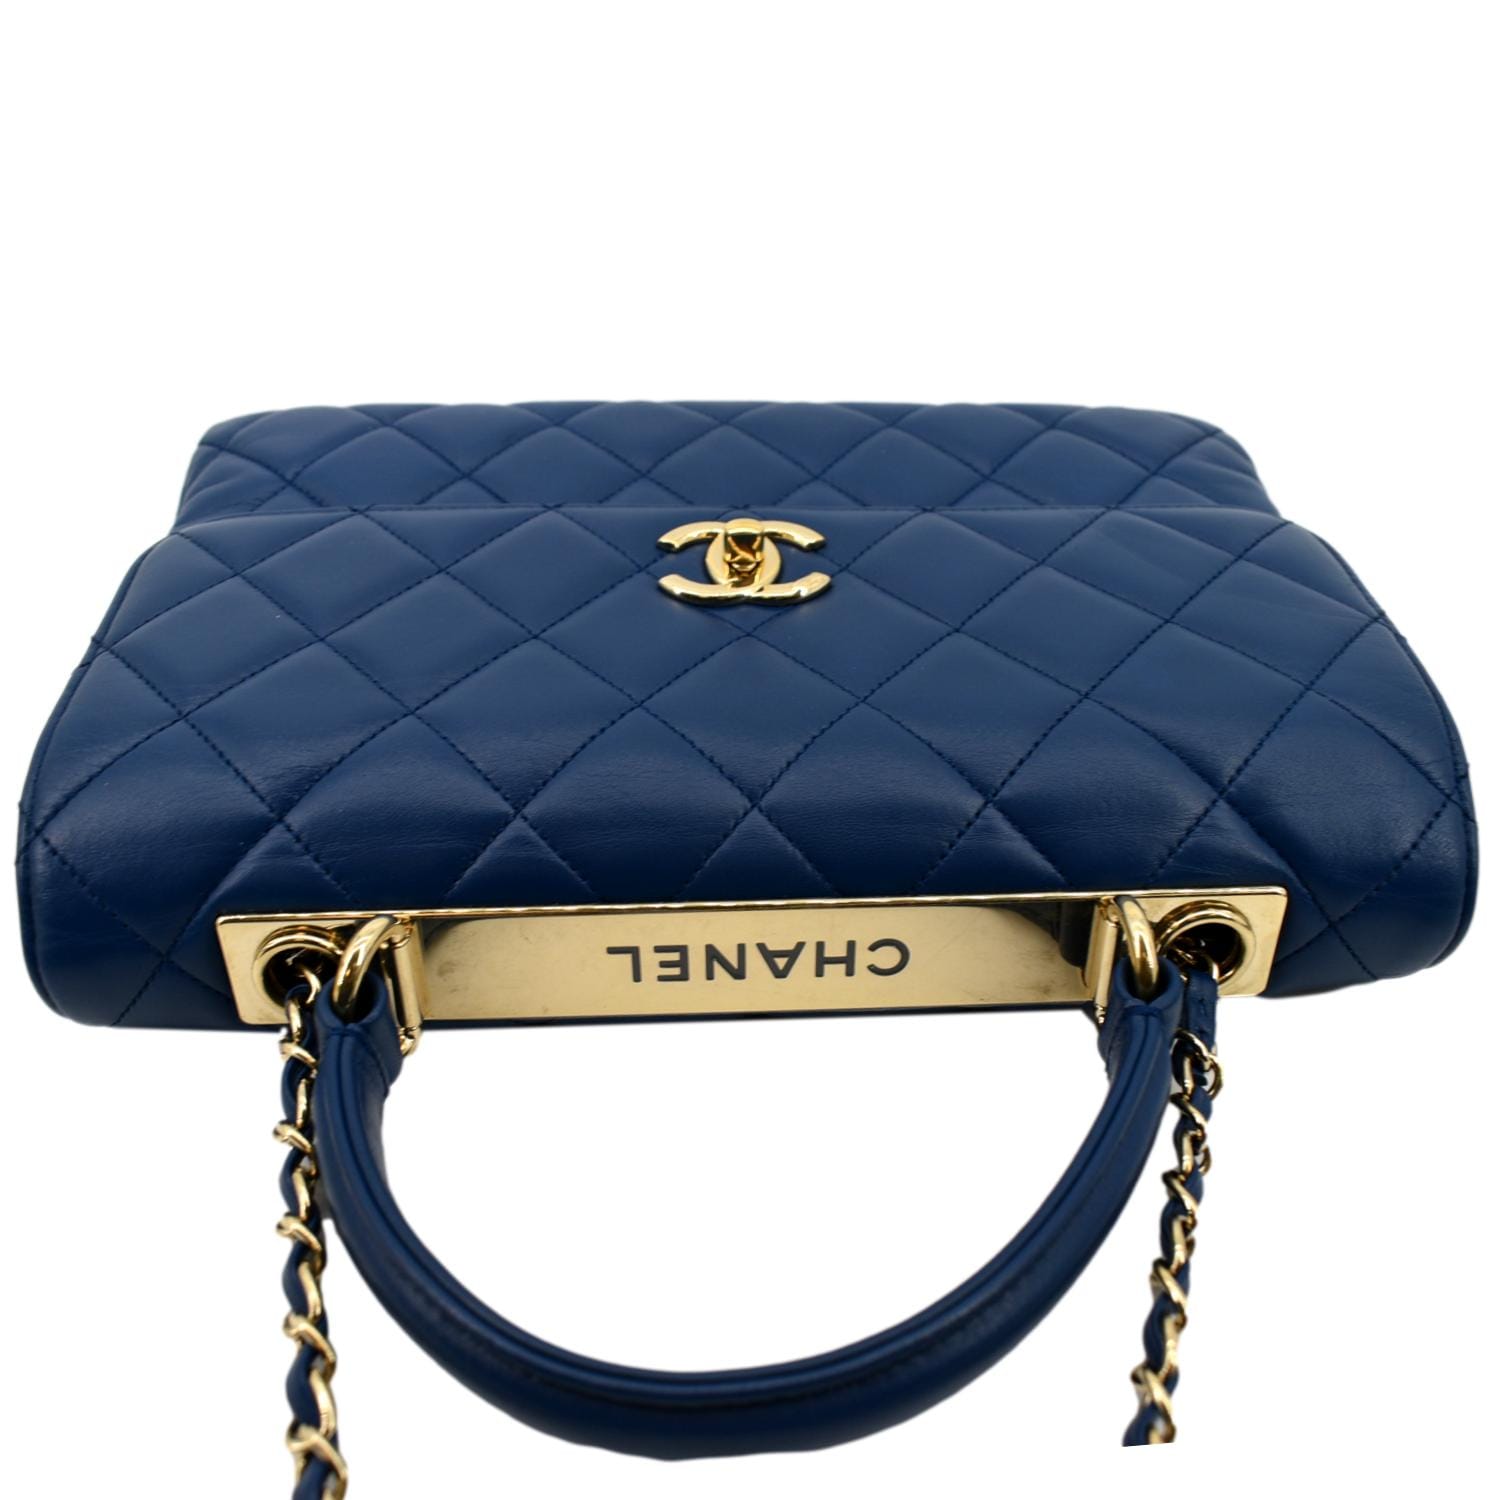 CHANEL New Classic Mini 20 cm Flap Bag With Handle